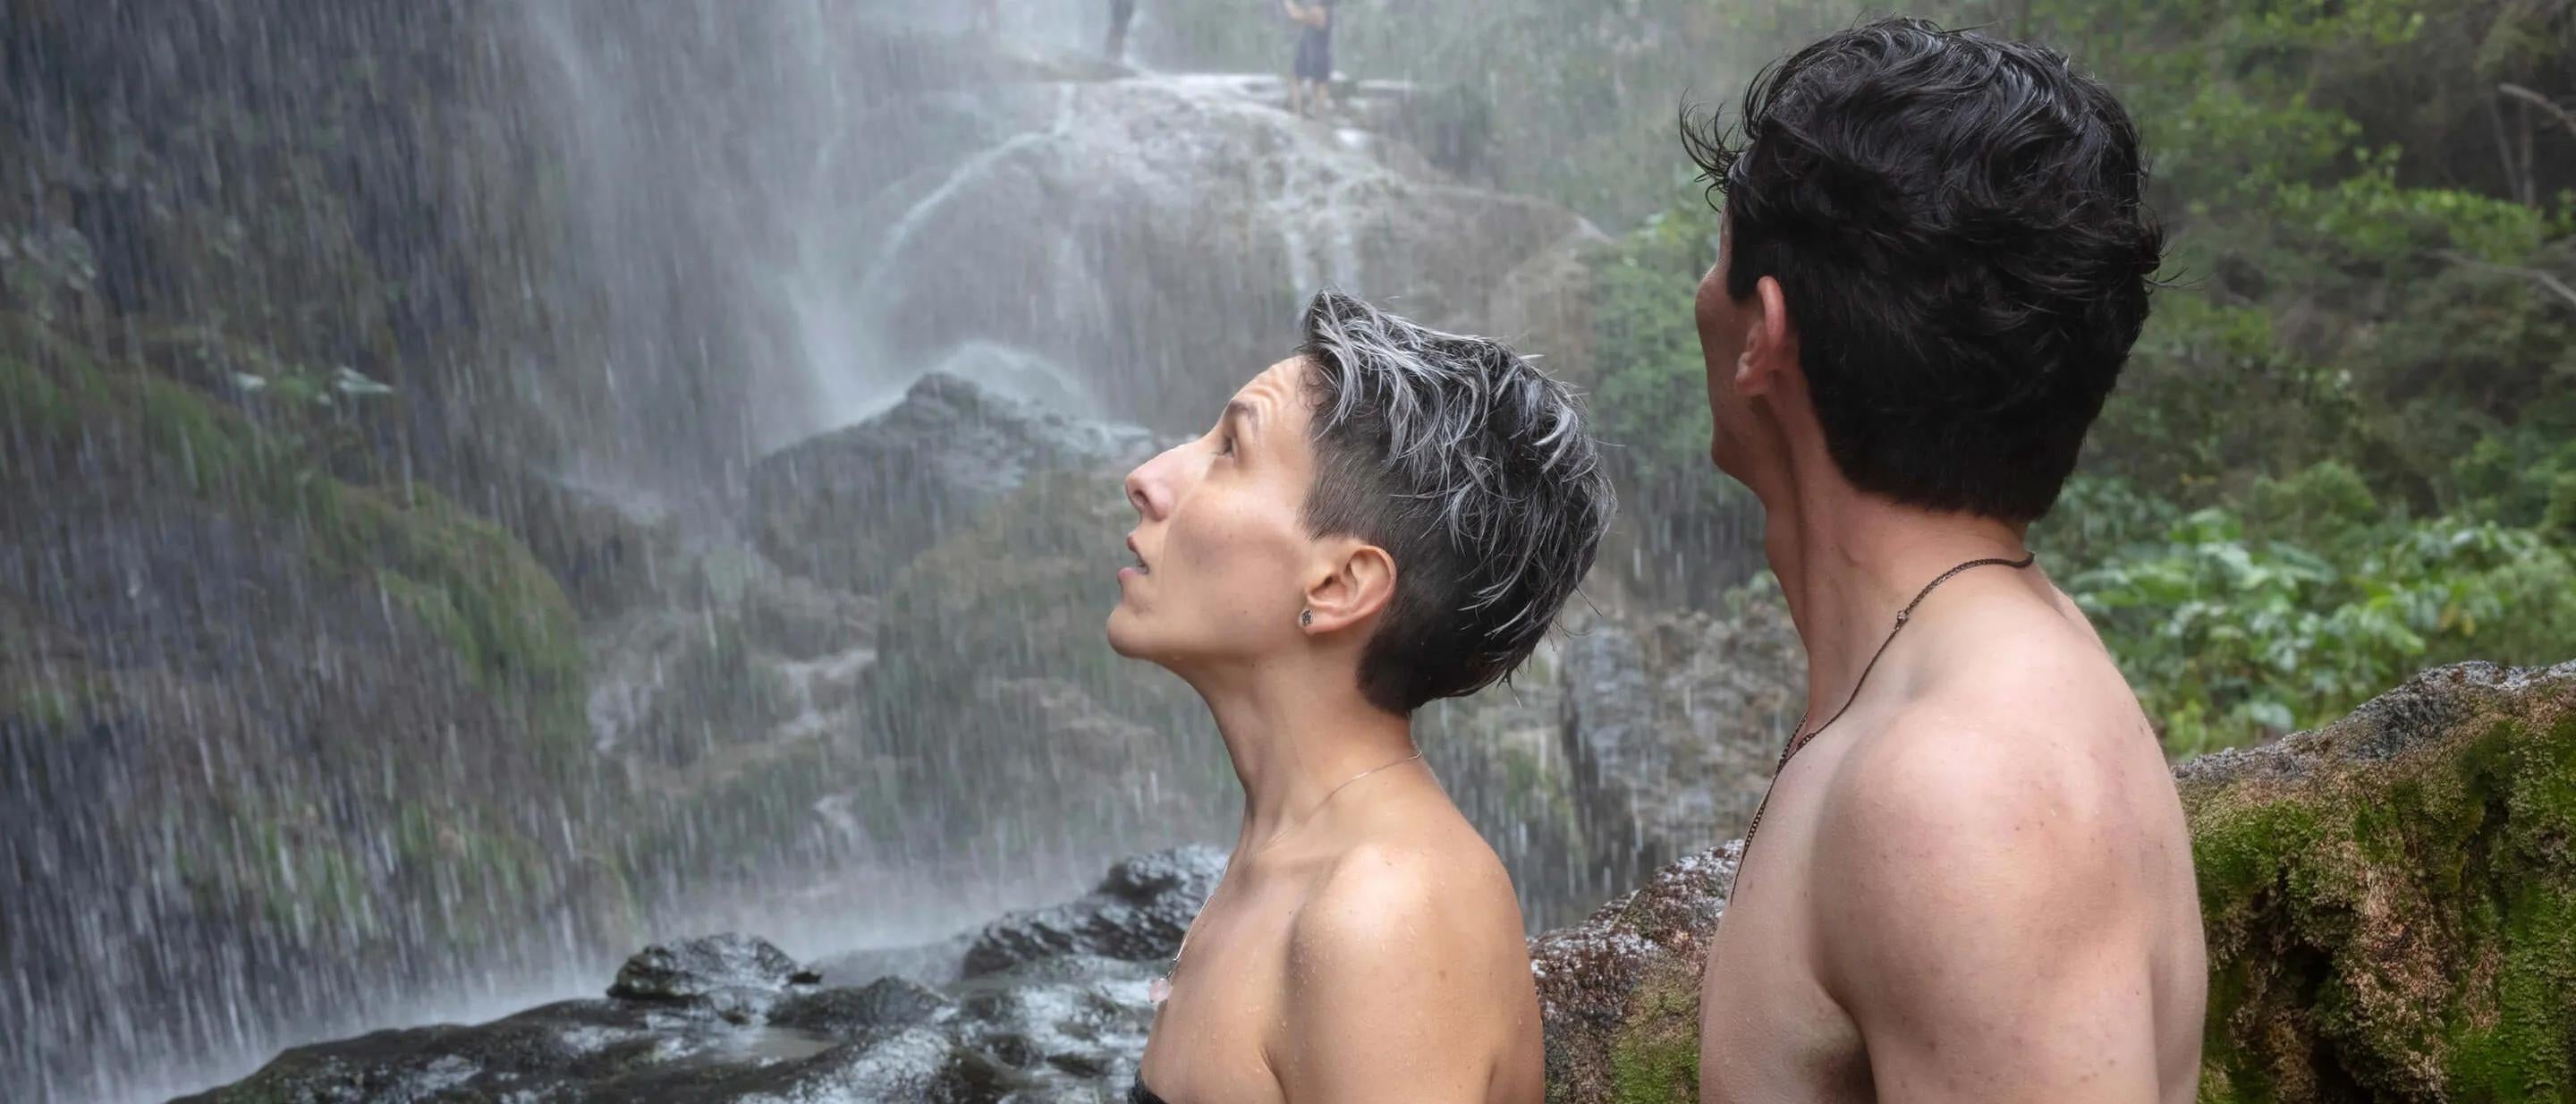 Two people side-on in front of a waterfall